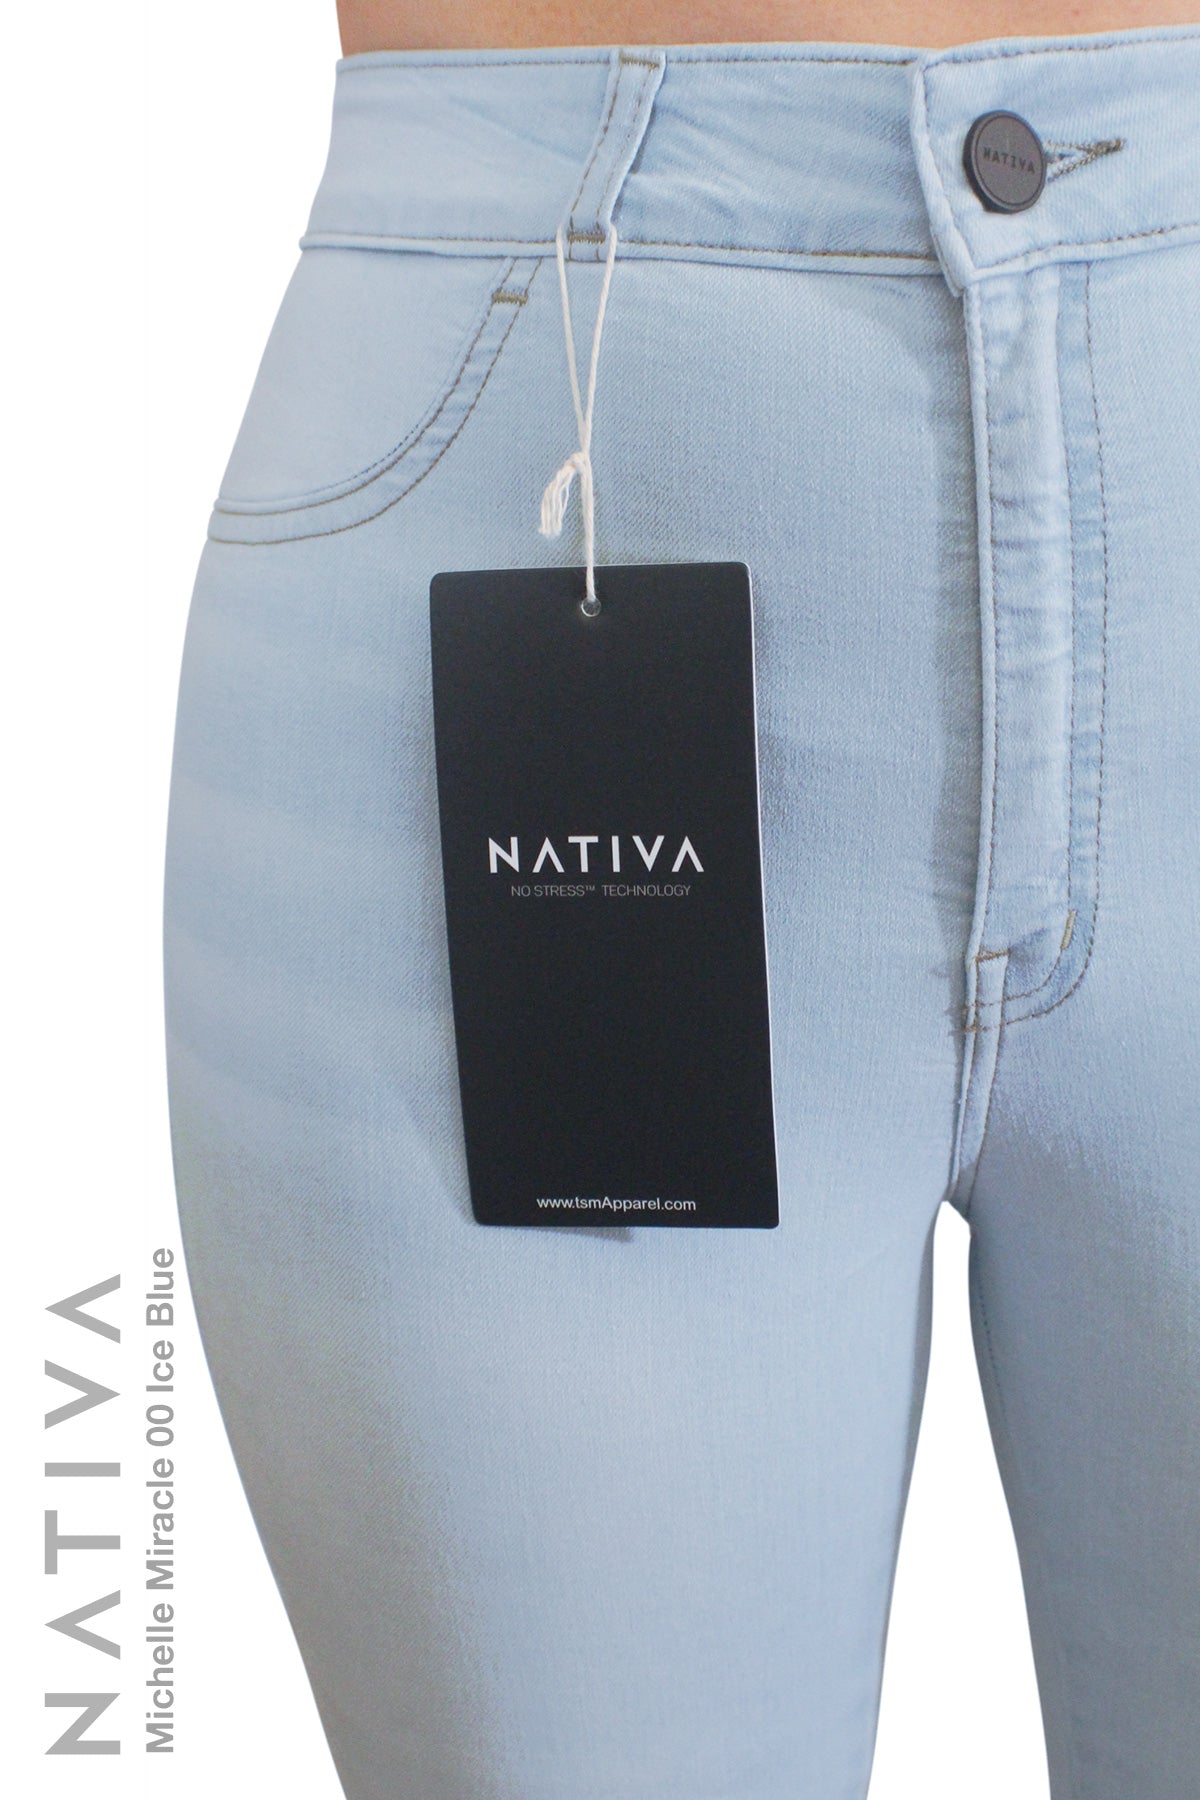 NATIVA, STRETCH JEANS. MICHELLE MIRACLE 00 ICE BLUE, High Shaping Capacity, Extreme Motion, Hi-Rise Super Skinny Jeans